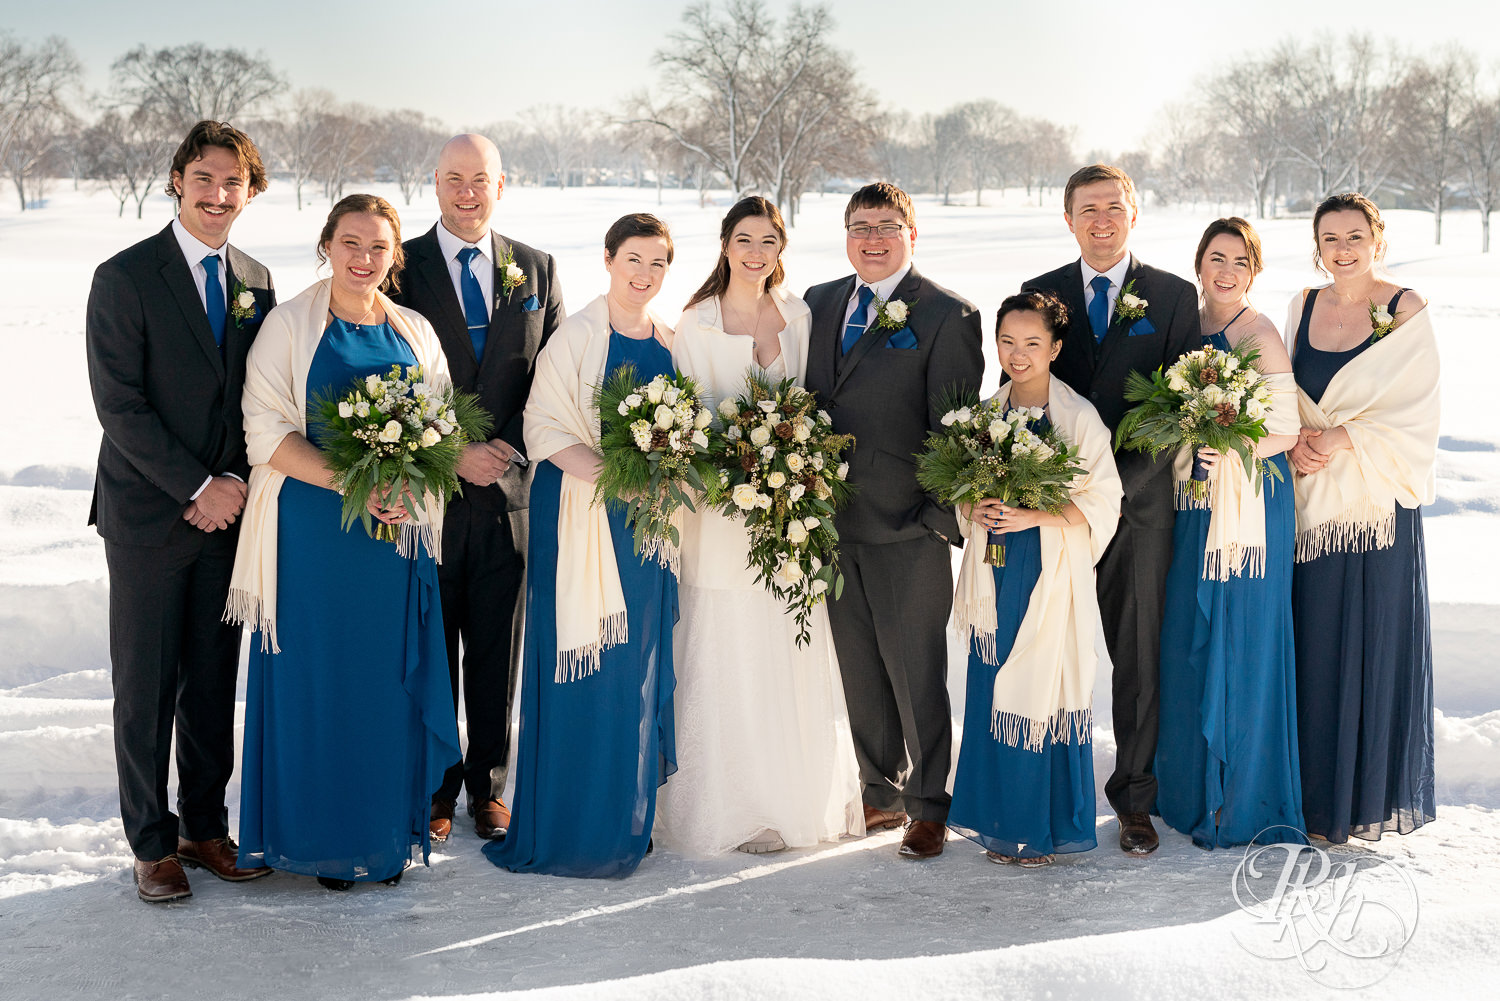 Wedding party in blue dresses and grey suits in the snow at Minneapolis Golf Club in Saint Louis Park, Minnesota.